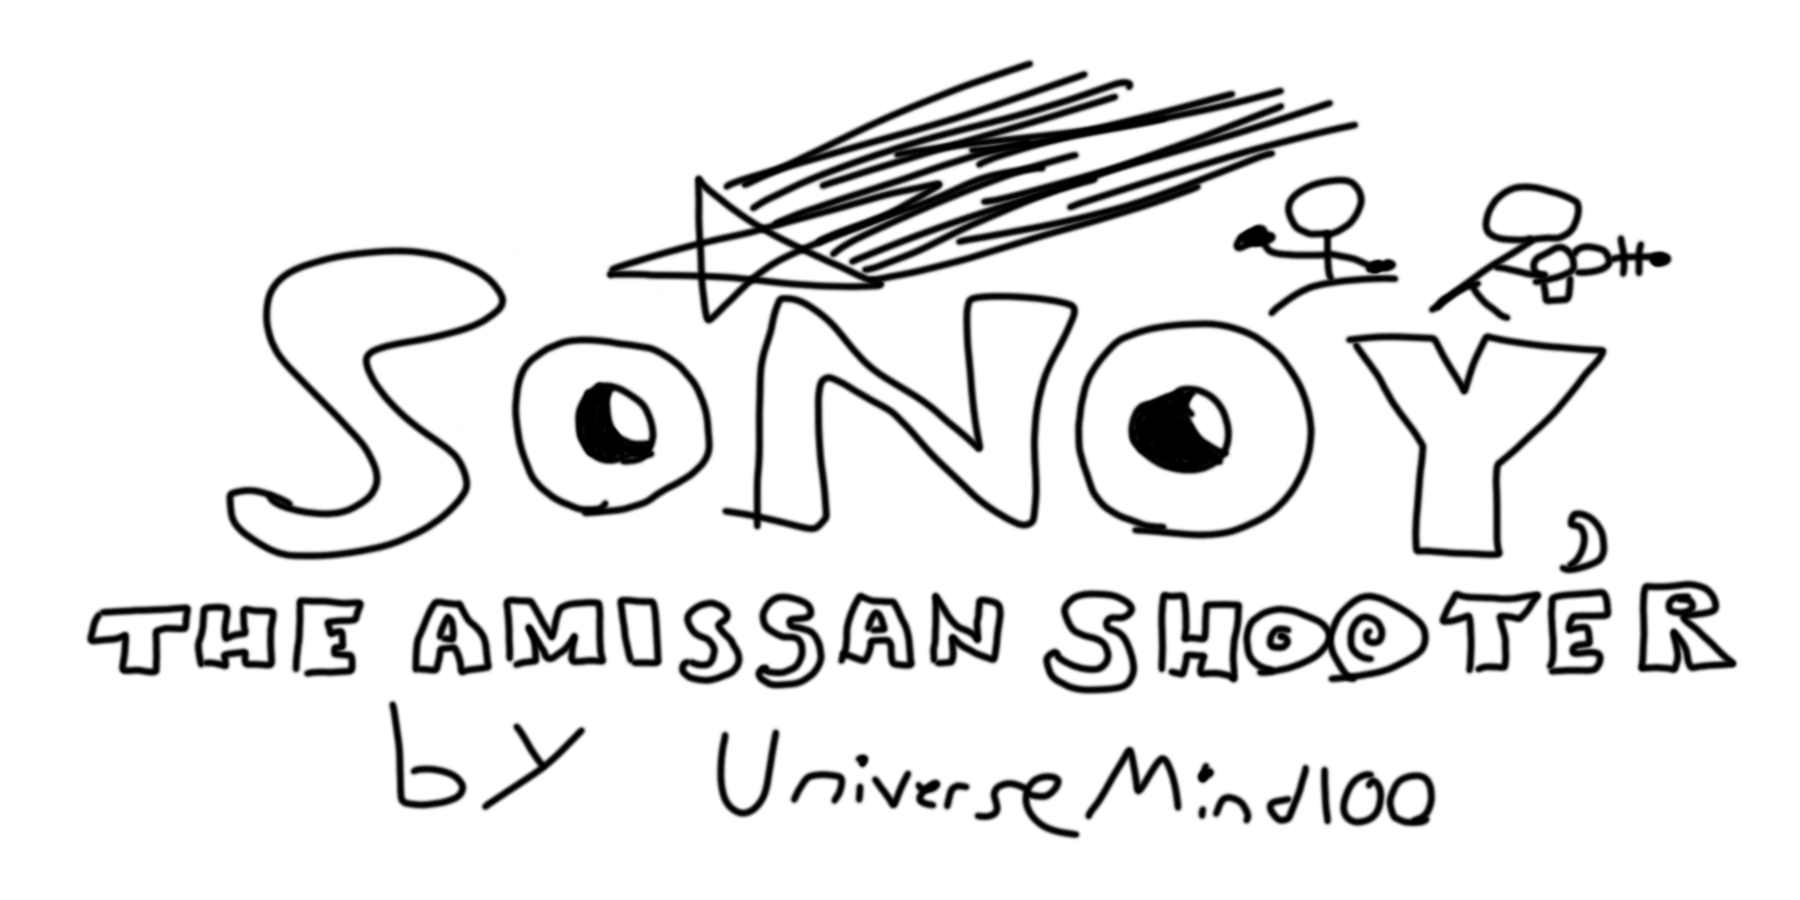 Sonoy, The Amissan Shooter